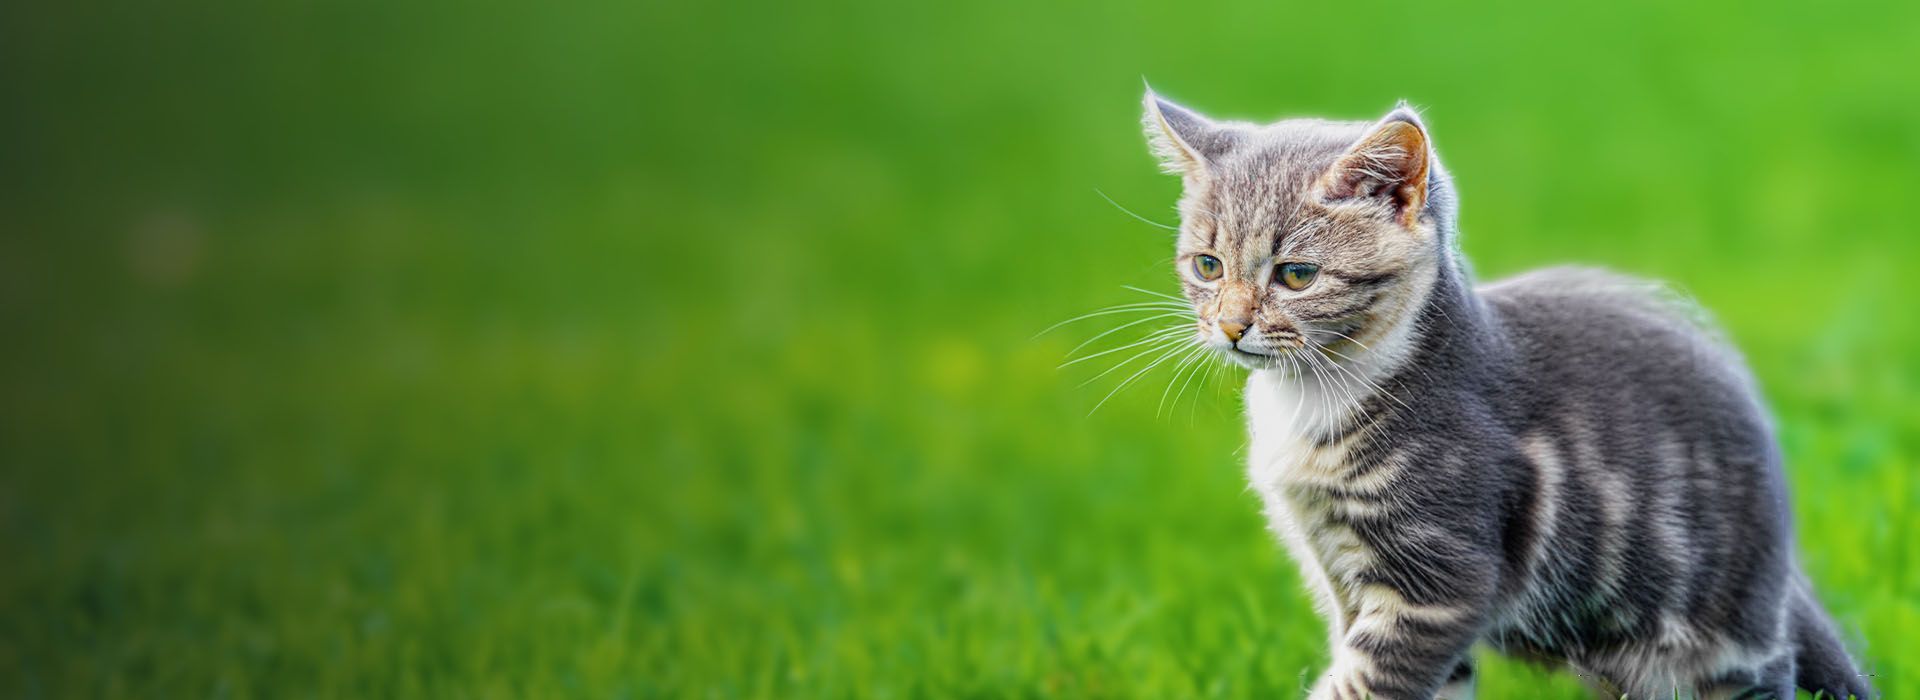 diffuse grass in the background, a brown and gray tabby cat, with a white chest, looking forward and down, walking towards it